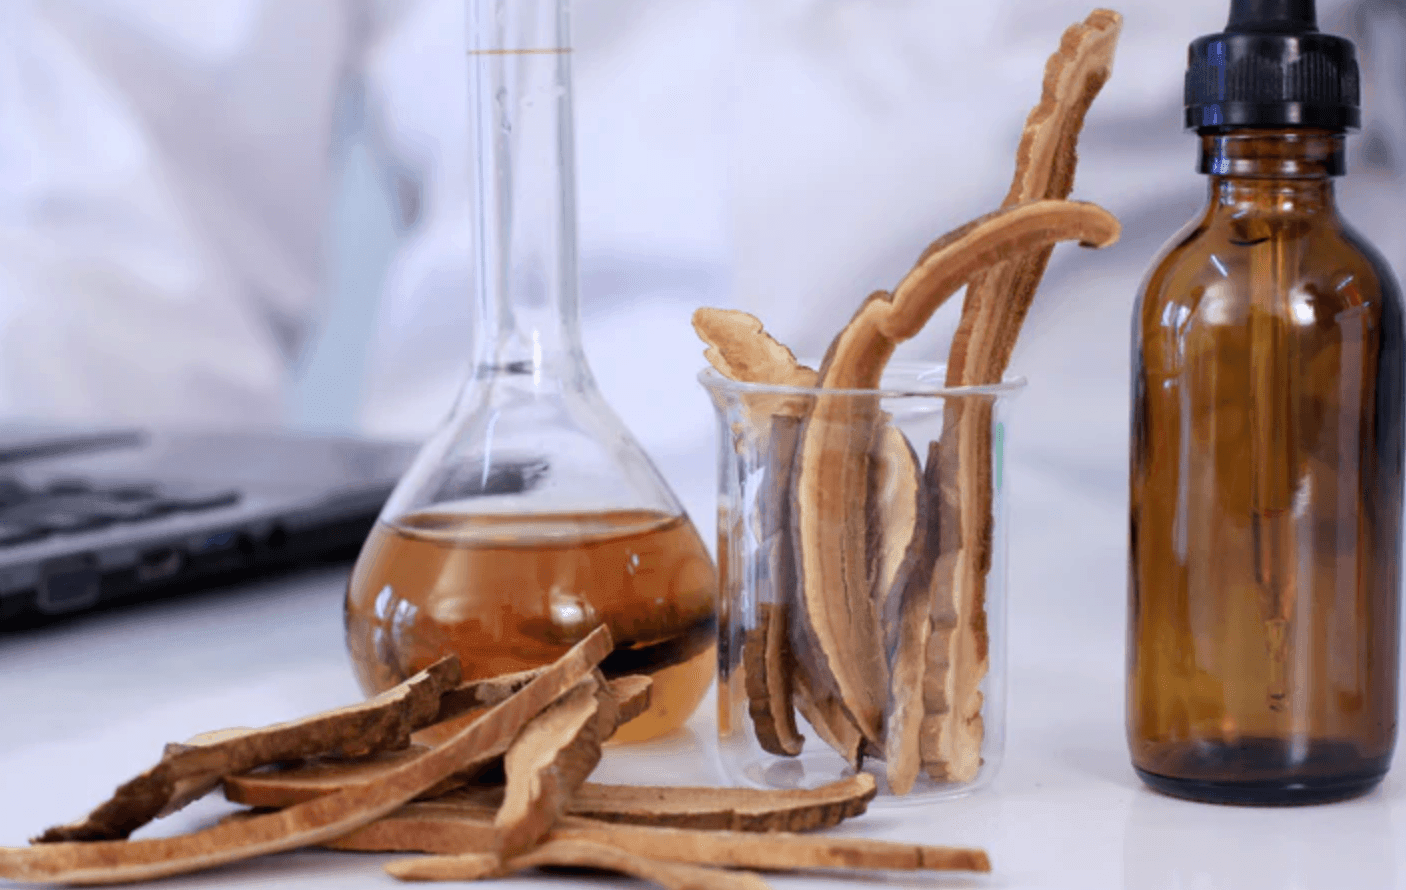 What is the Difference and Benefits of Mushroom Tinctures vs Mushroom Powder? - No Ordinary Moments